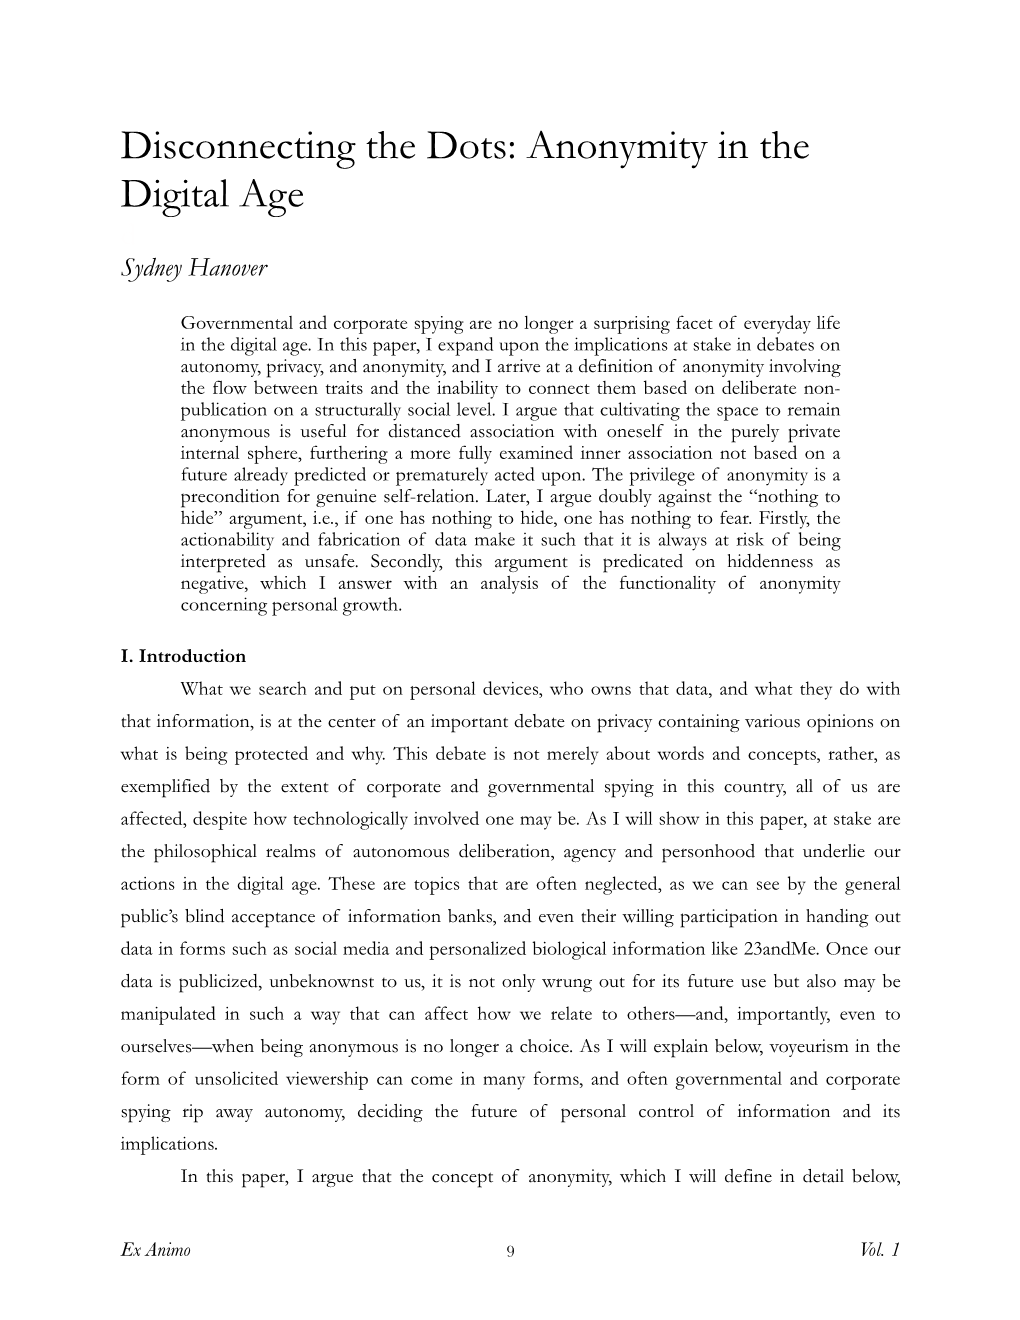 Disconnecting the Dots: Anonymity in the Digital Age D Sydney Hanover